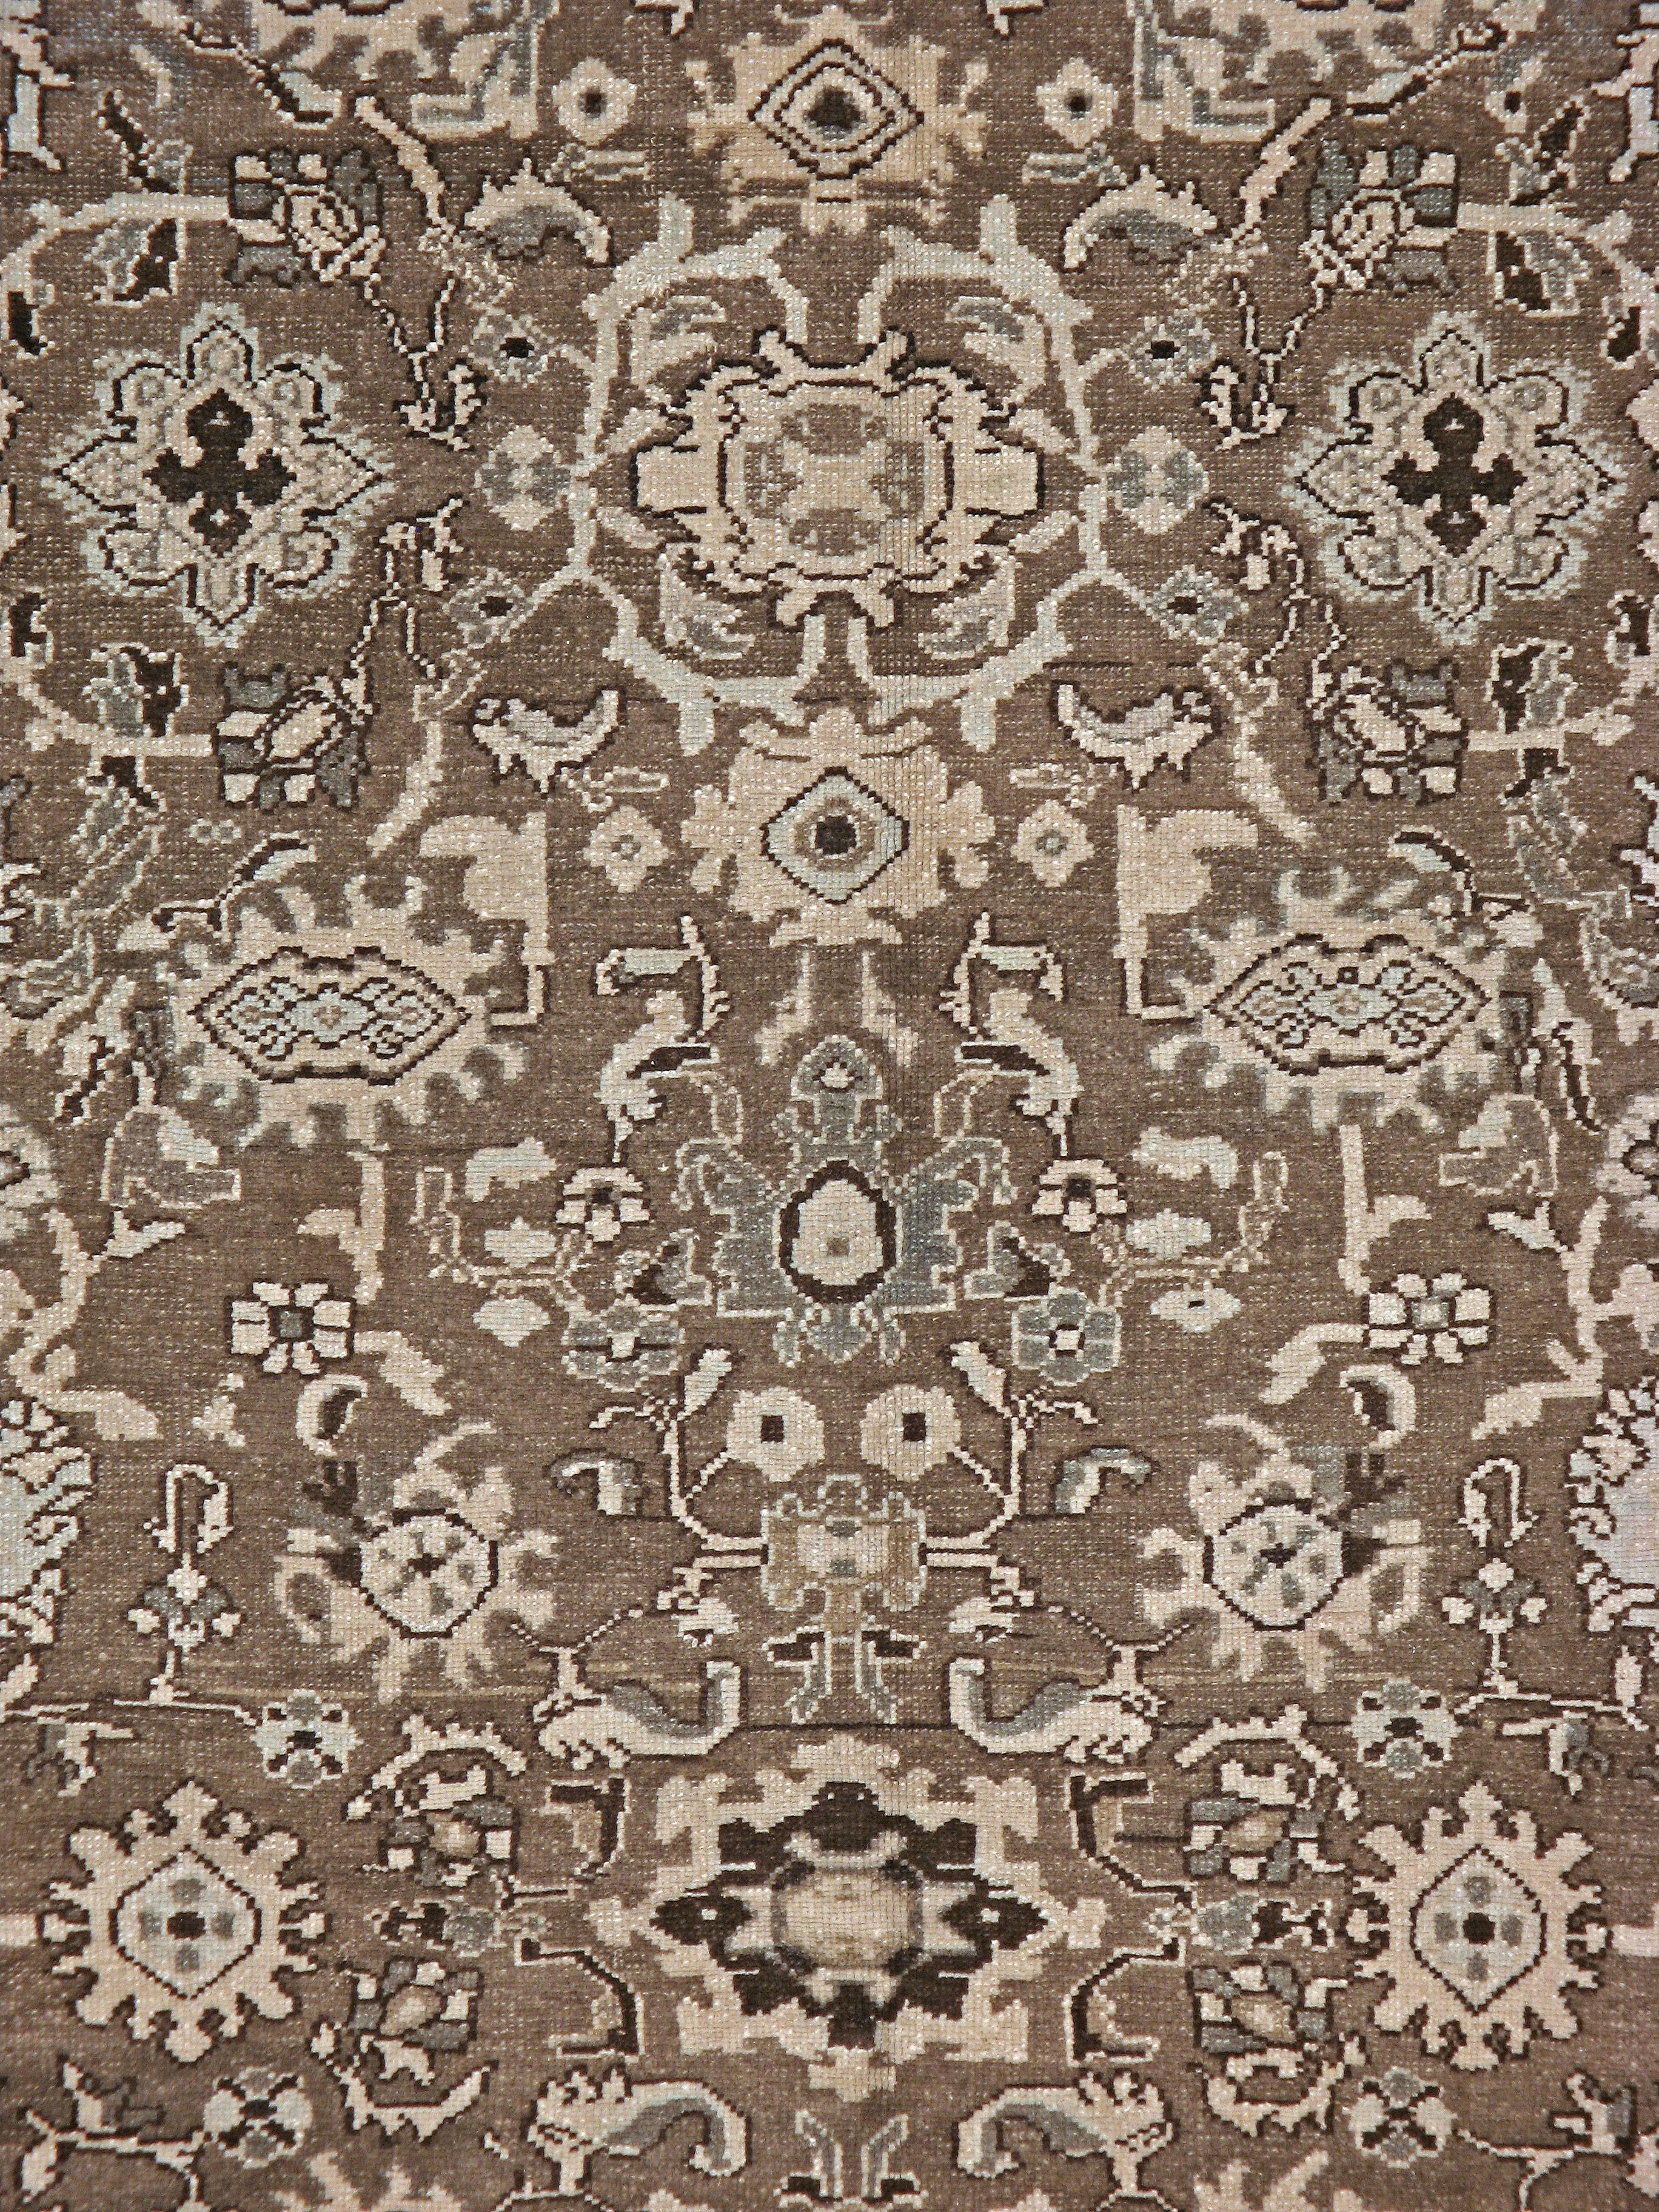 A vintage Persian Malayer carpet from the mid-20th century.